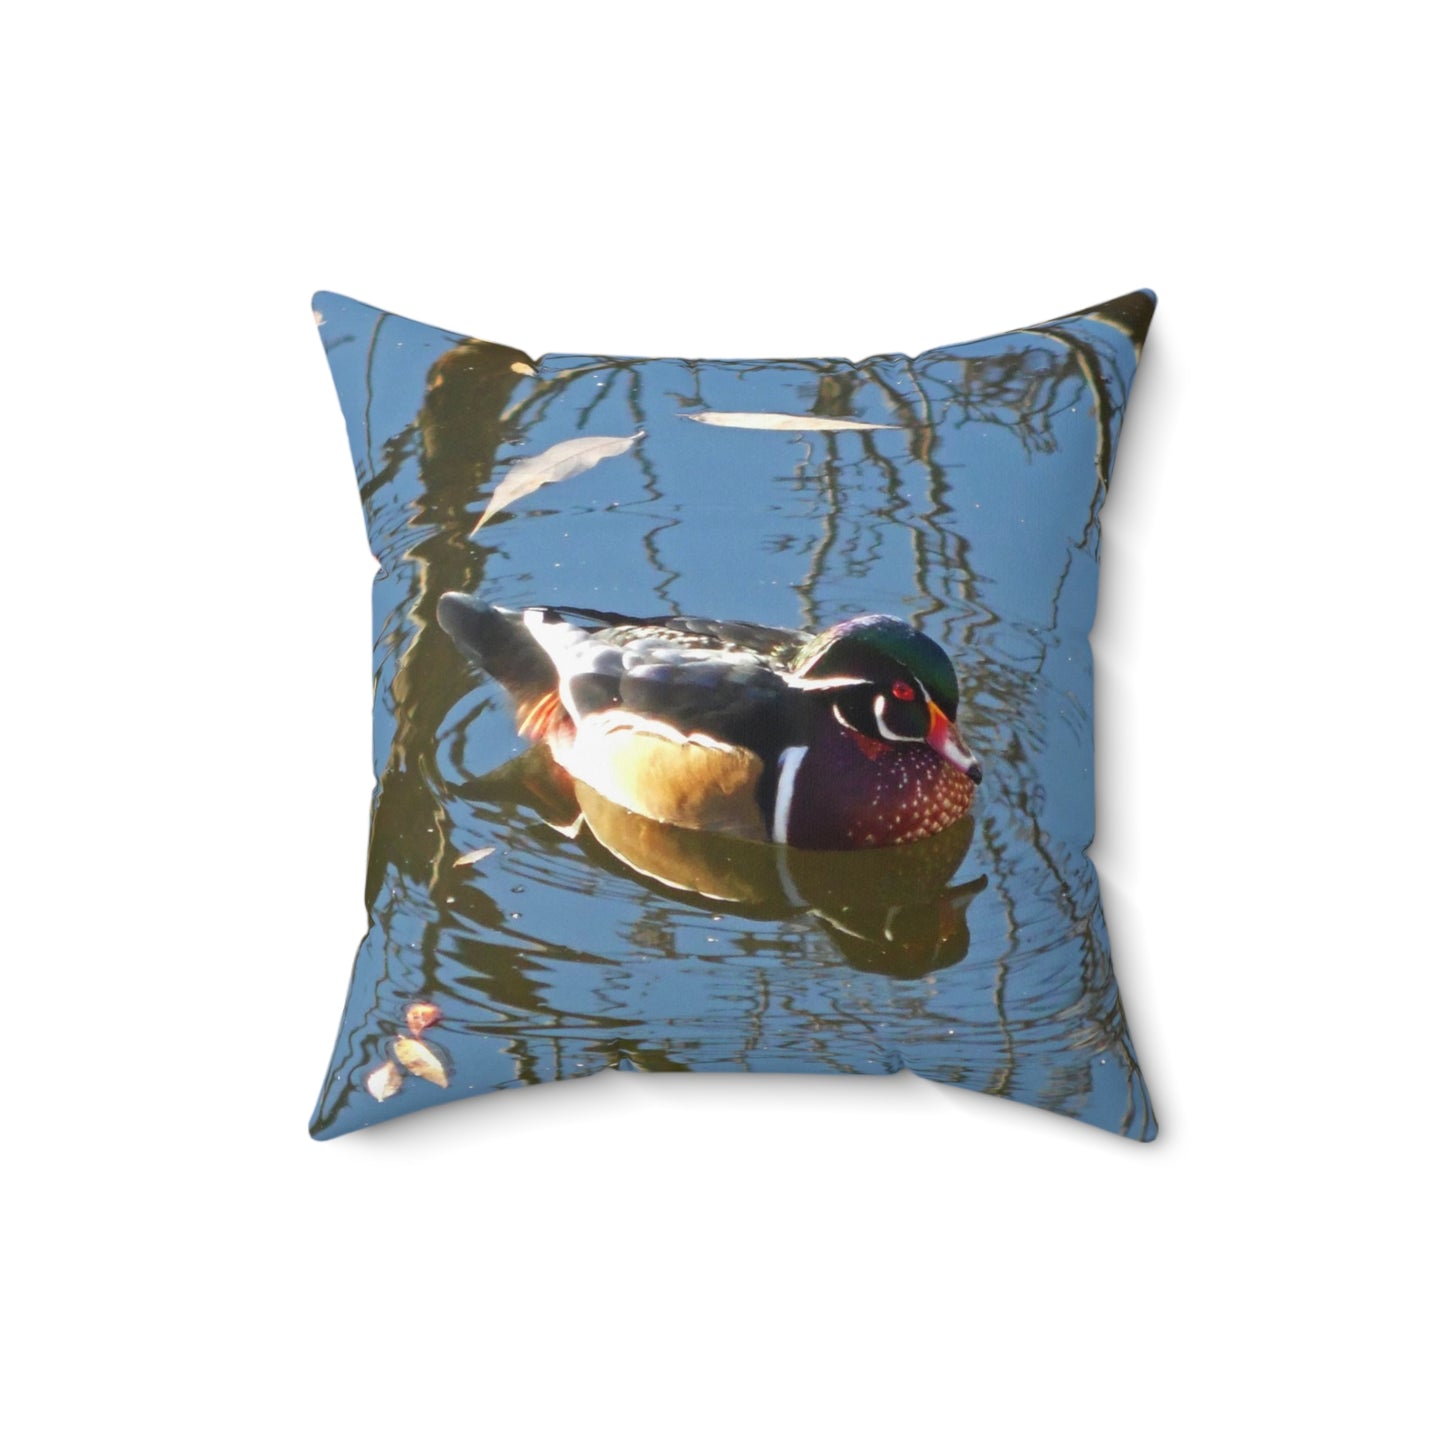 Reflections Wood Duck Spun Polyester Square Pillow